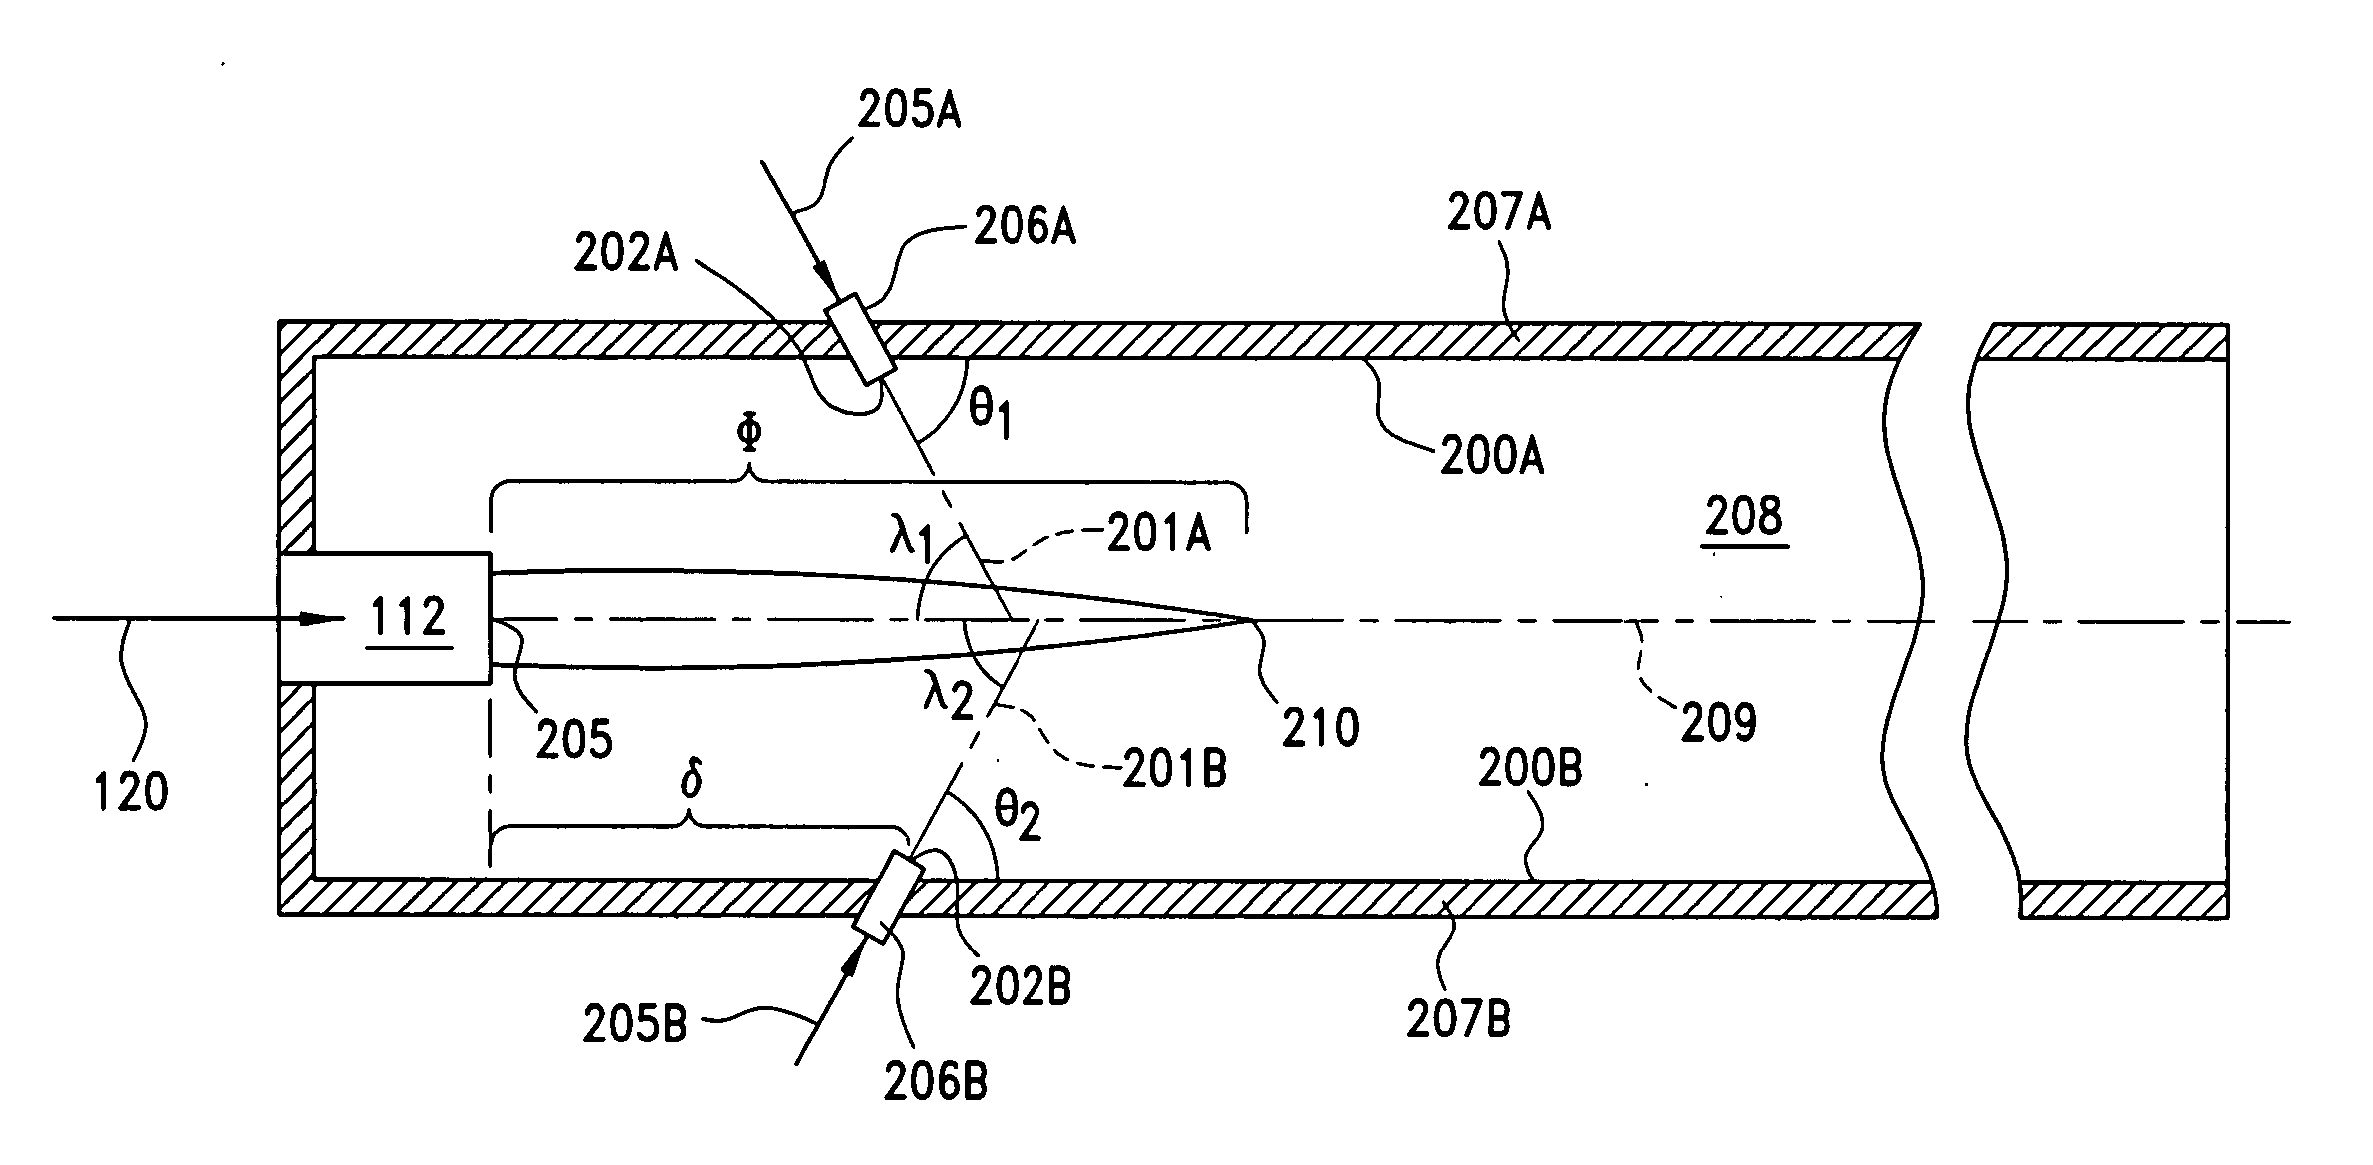 Controlling flame temperature in a flame spray reaction process